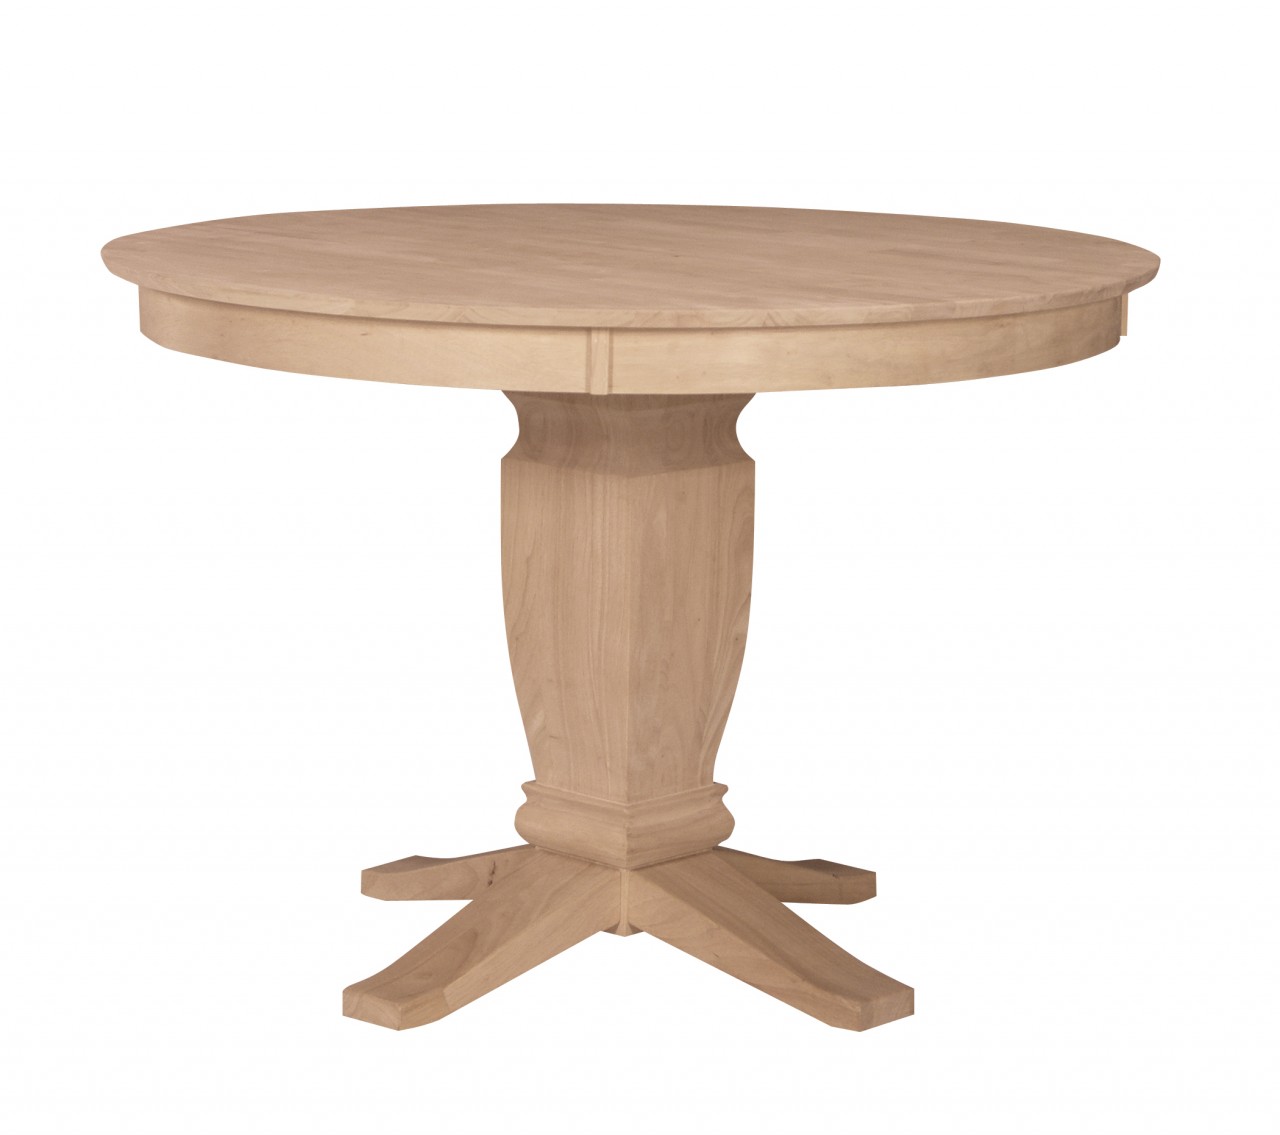 1280x1135px 8 Fabulous Unfinished Round Dining Table Picture in Furniture